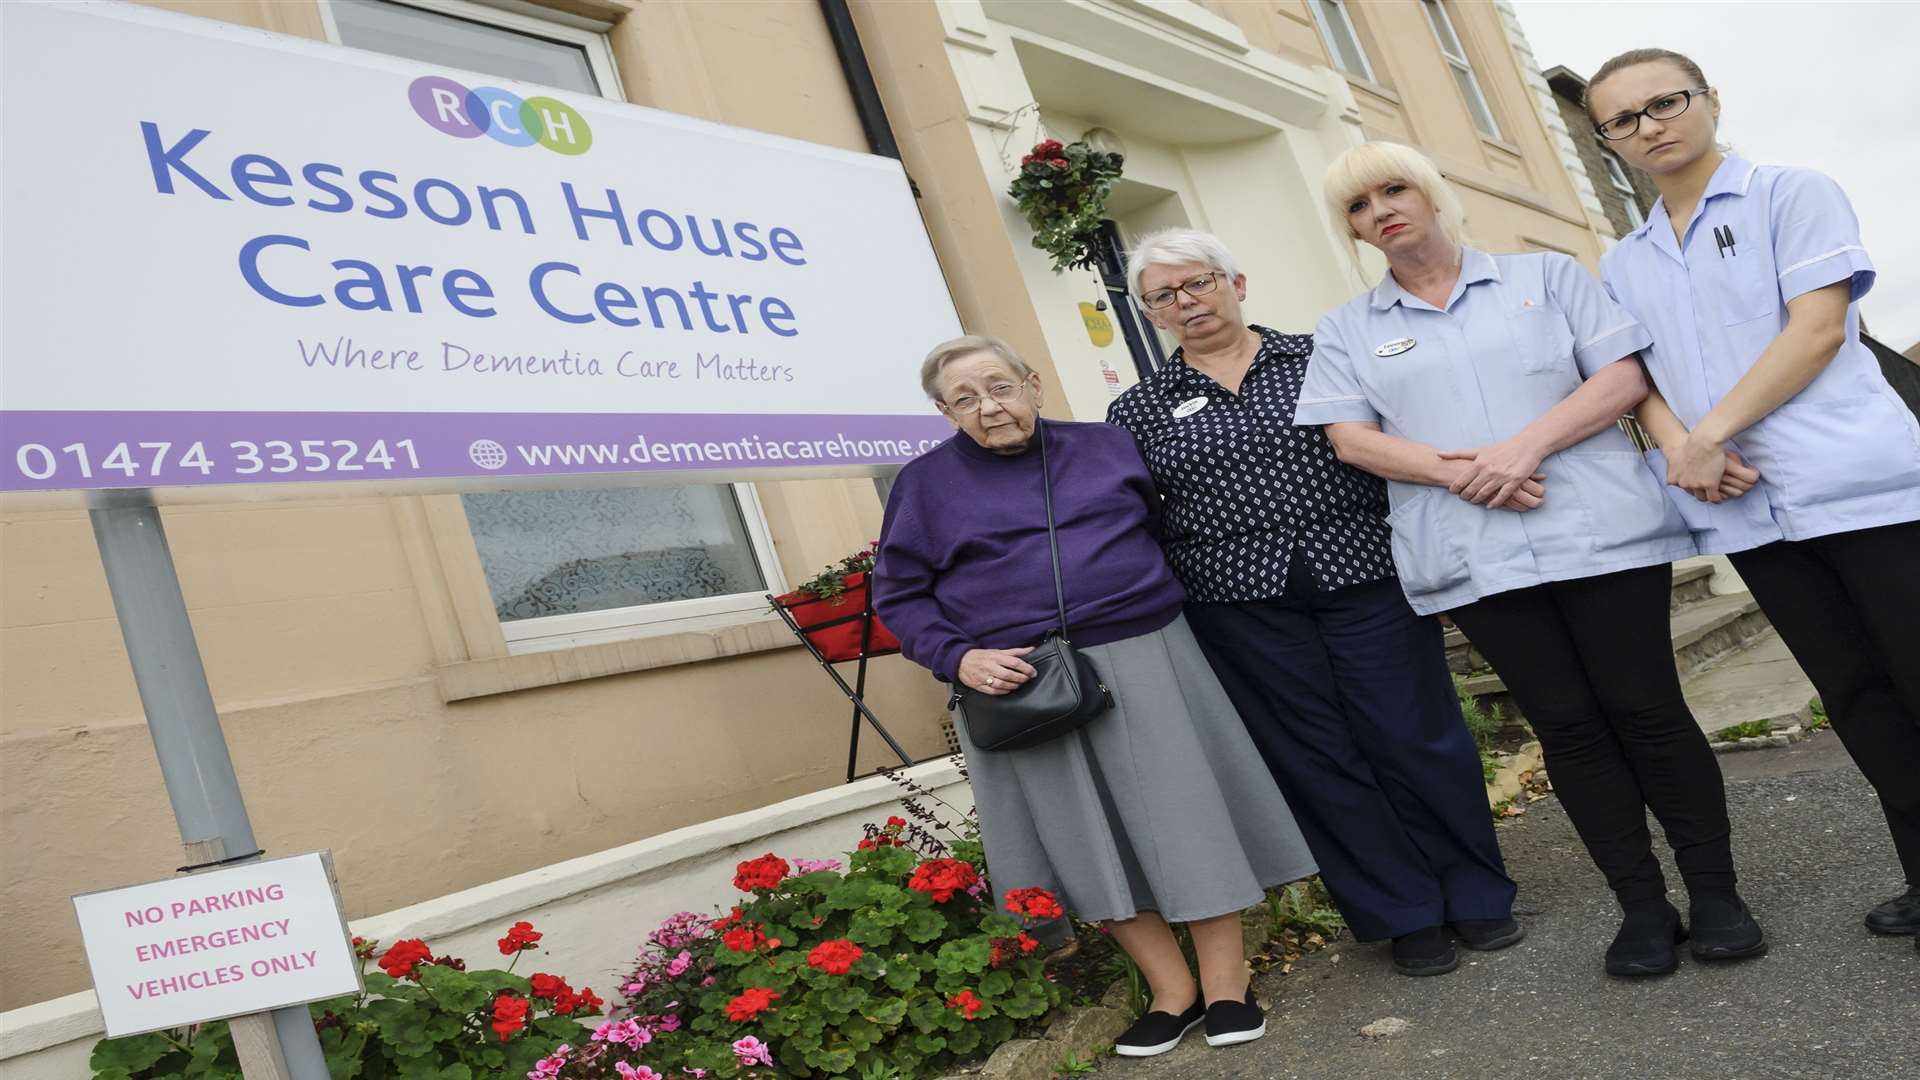 From left, resident Violet Pringle, deputy manager Jackie Catley, Leeane Goodayle and Marite Sincina